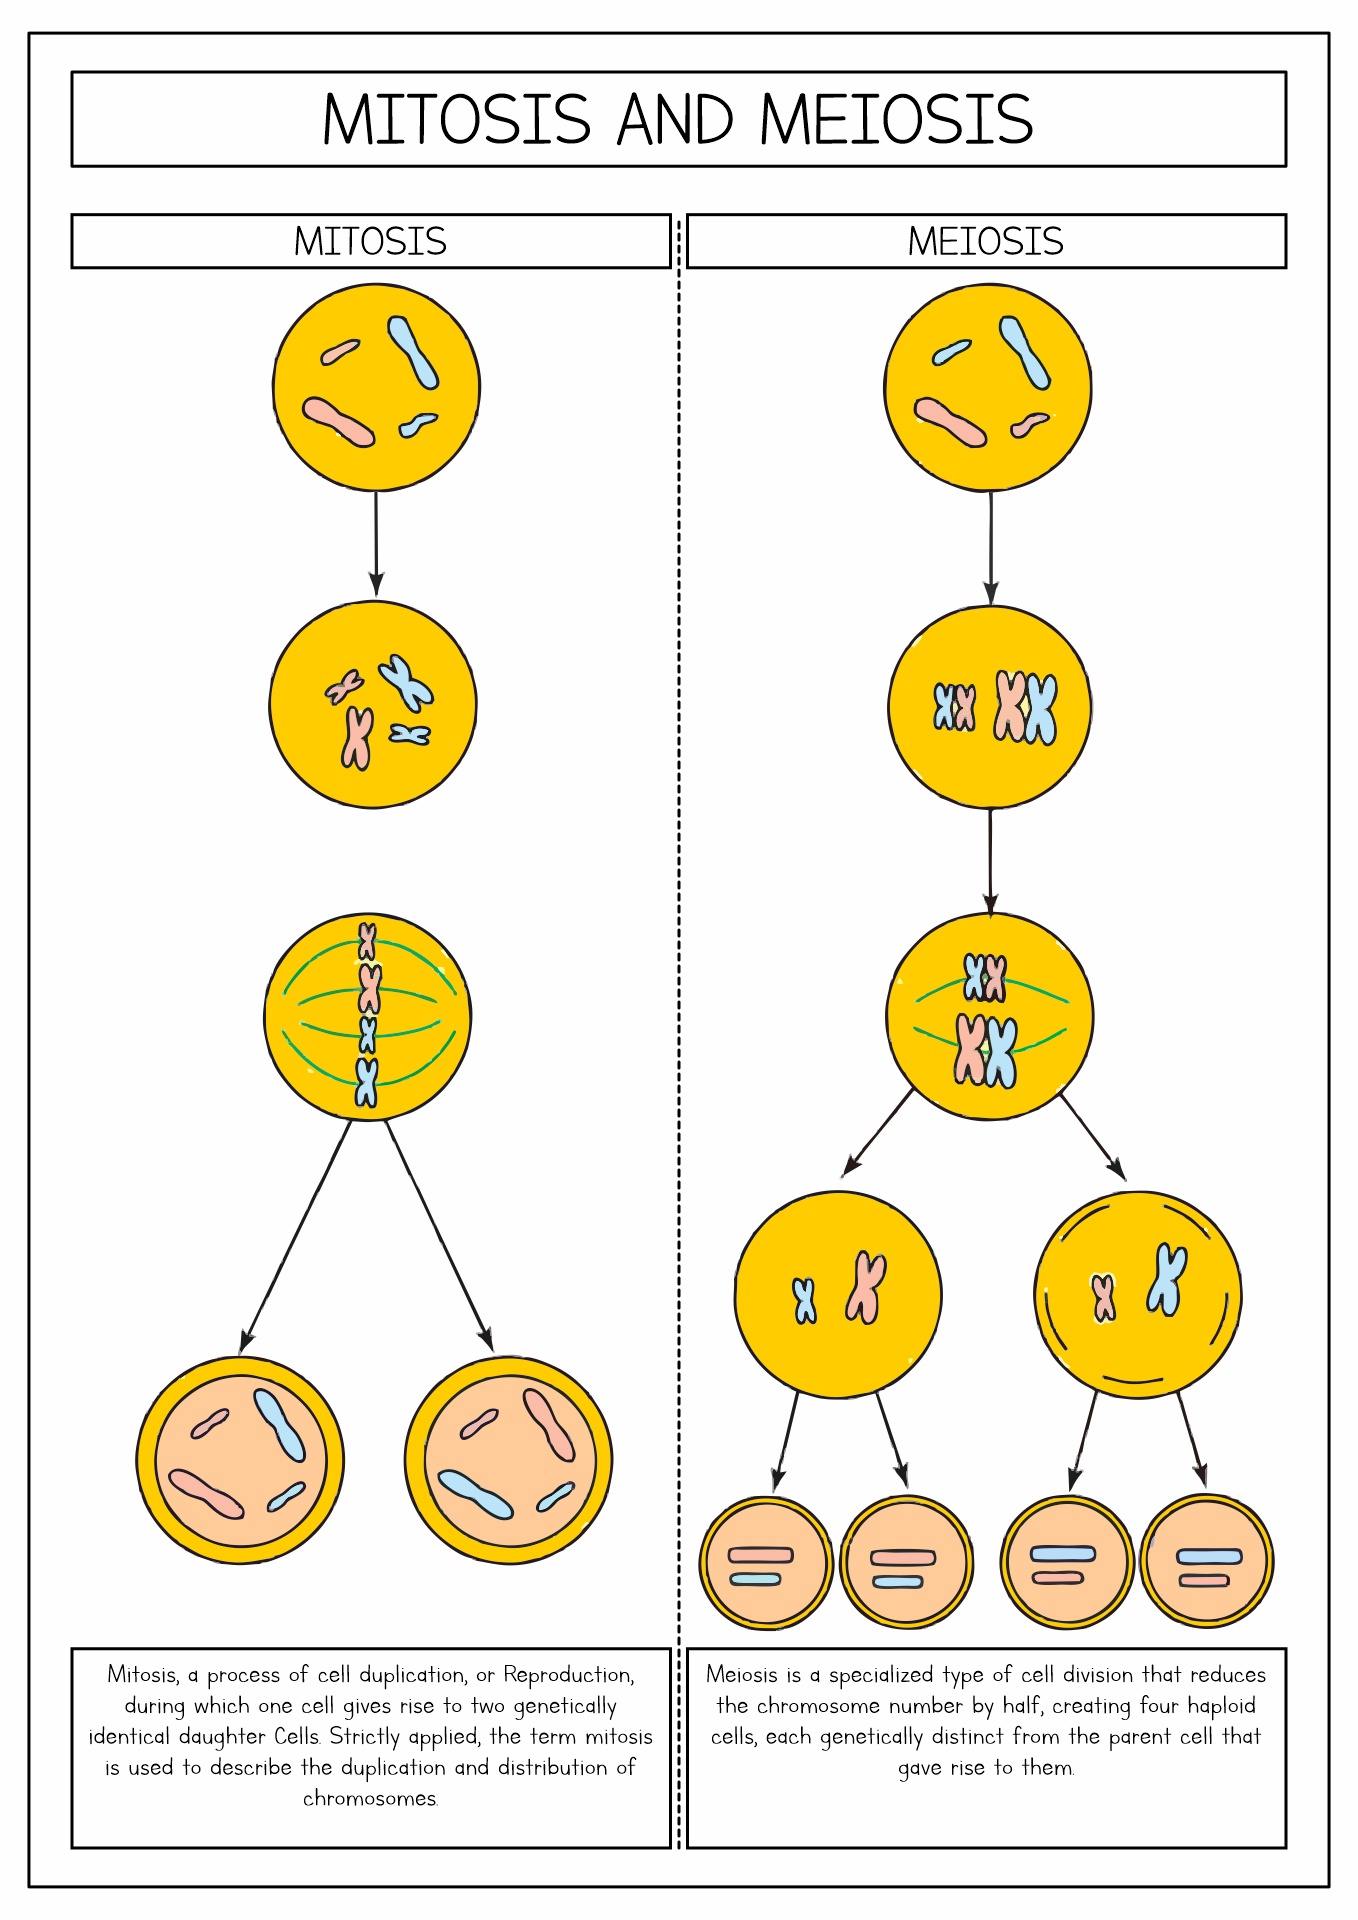 Meiosis and Mitosis Replication of DNA Image